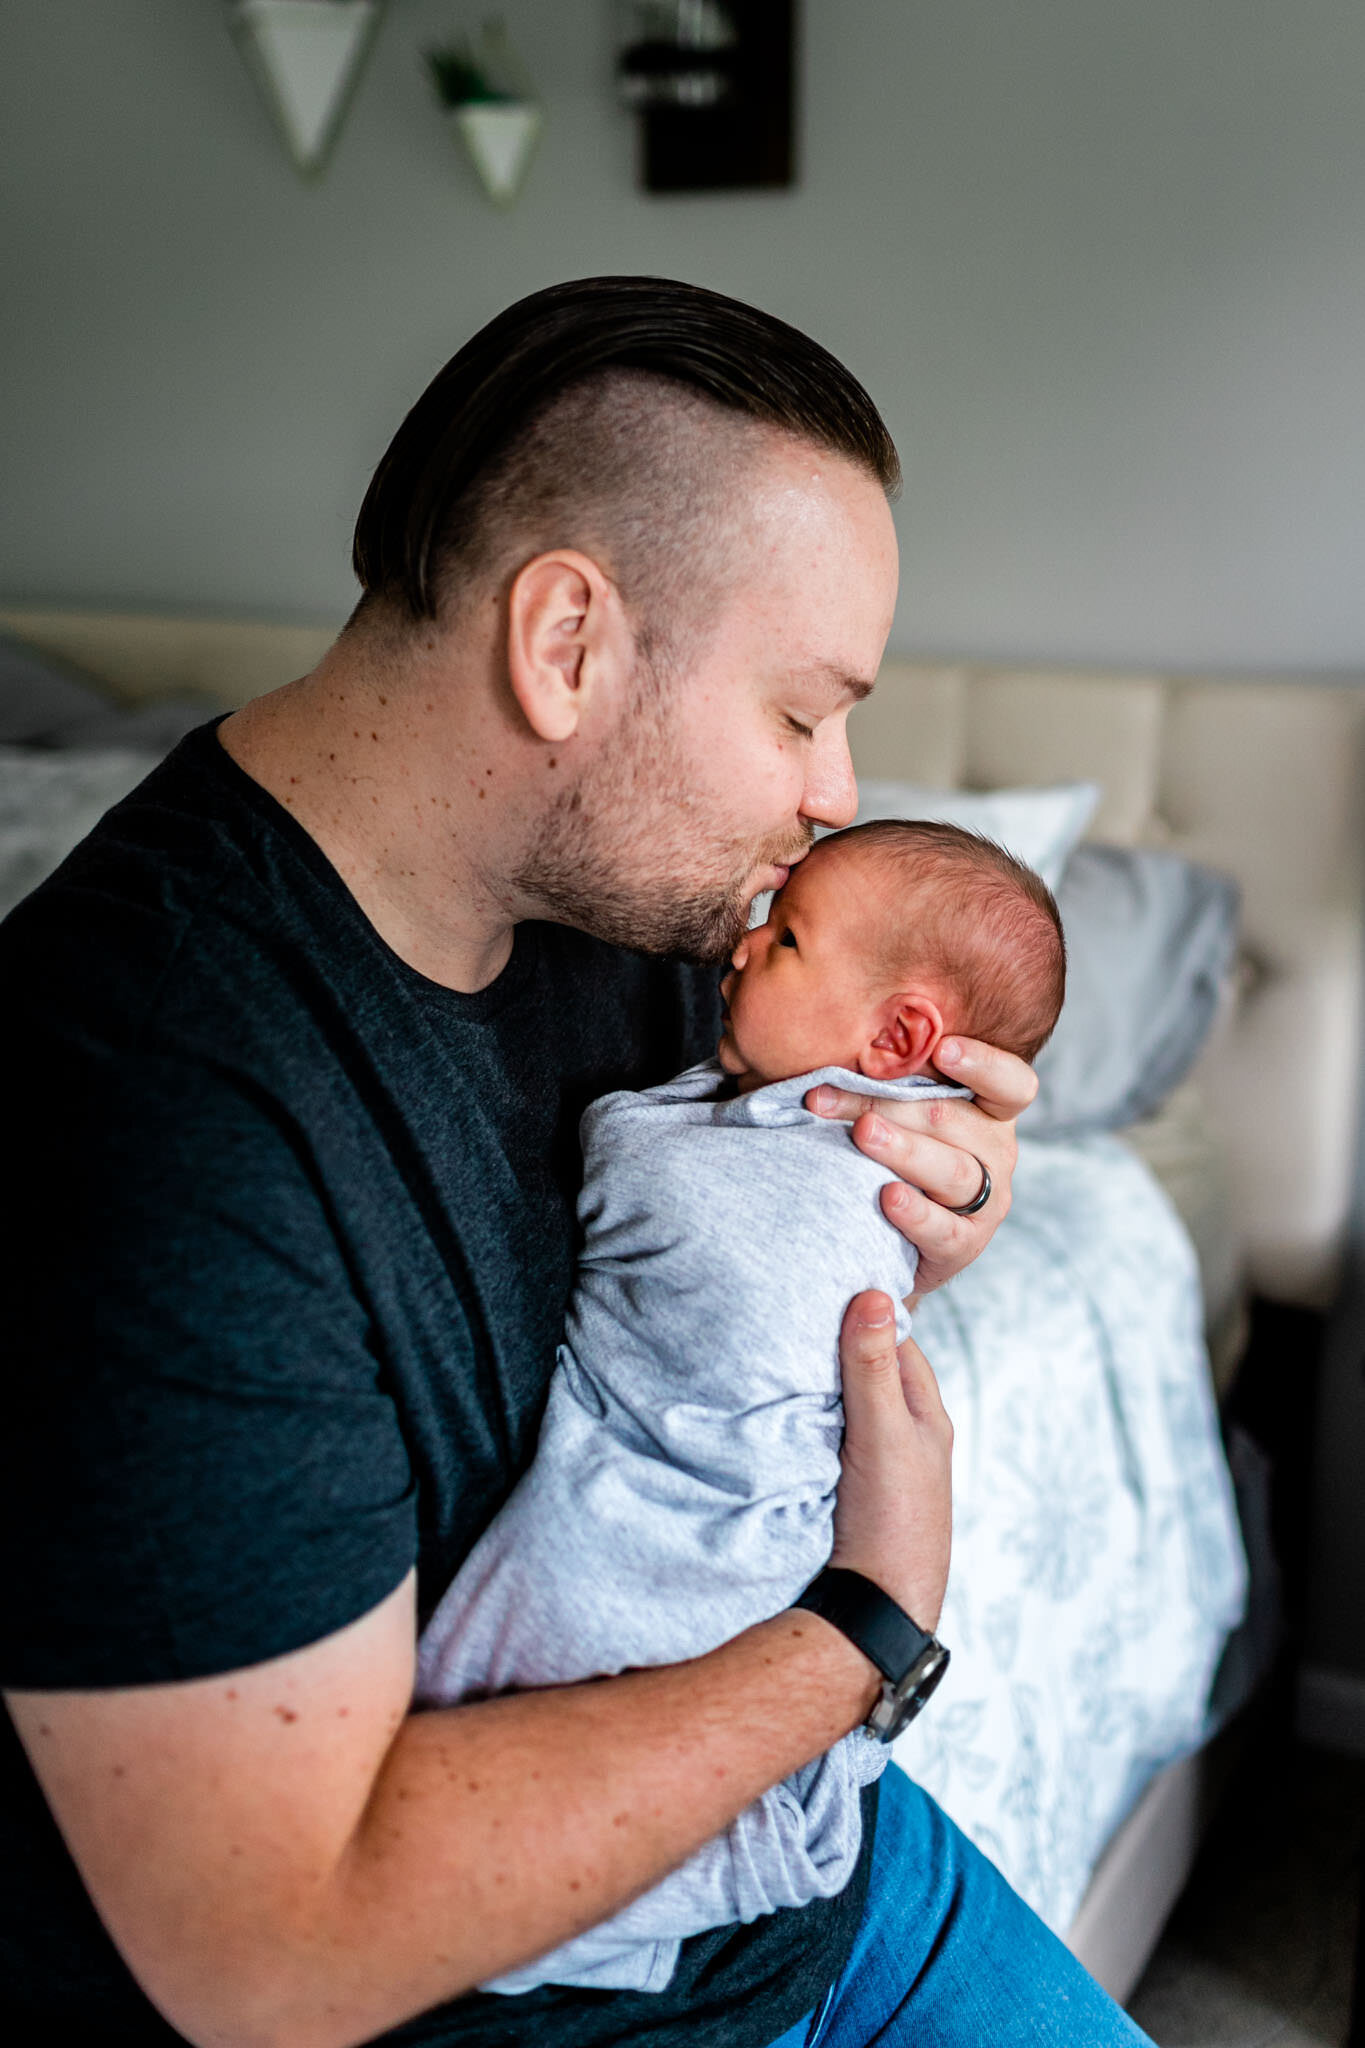 Father kissing baby on forehead | Holly Spring Newborn Photographer | By G. Lin Photography | At home lifestyle newborn photography